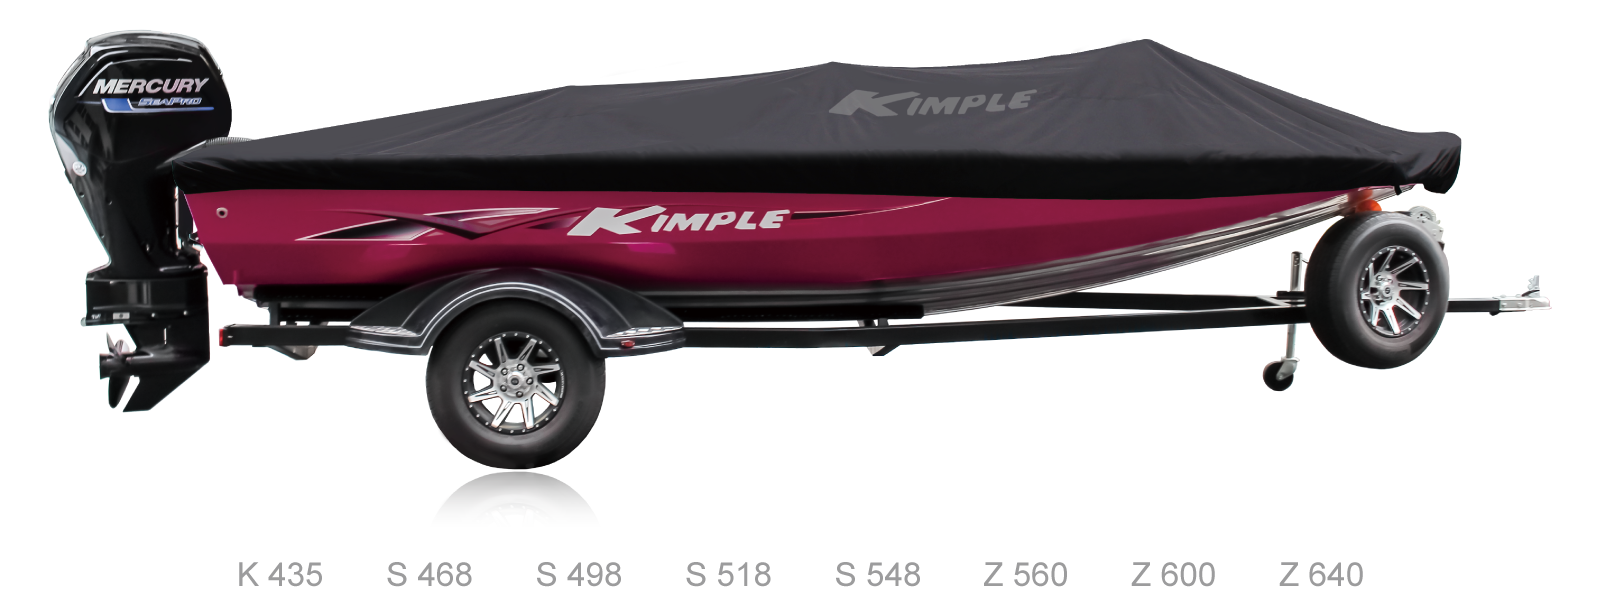 Kimple boat cover